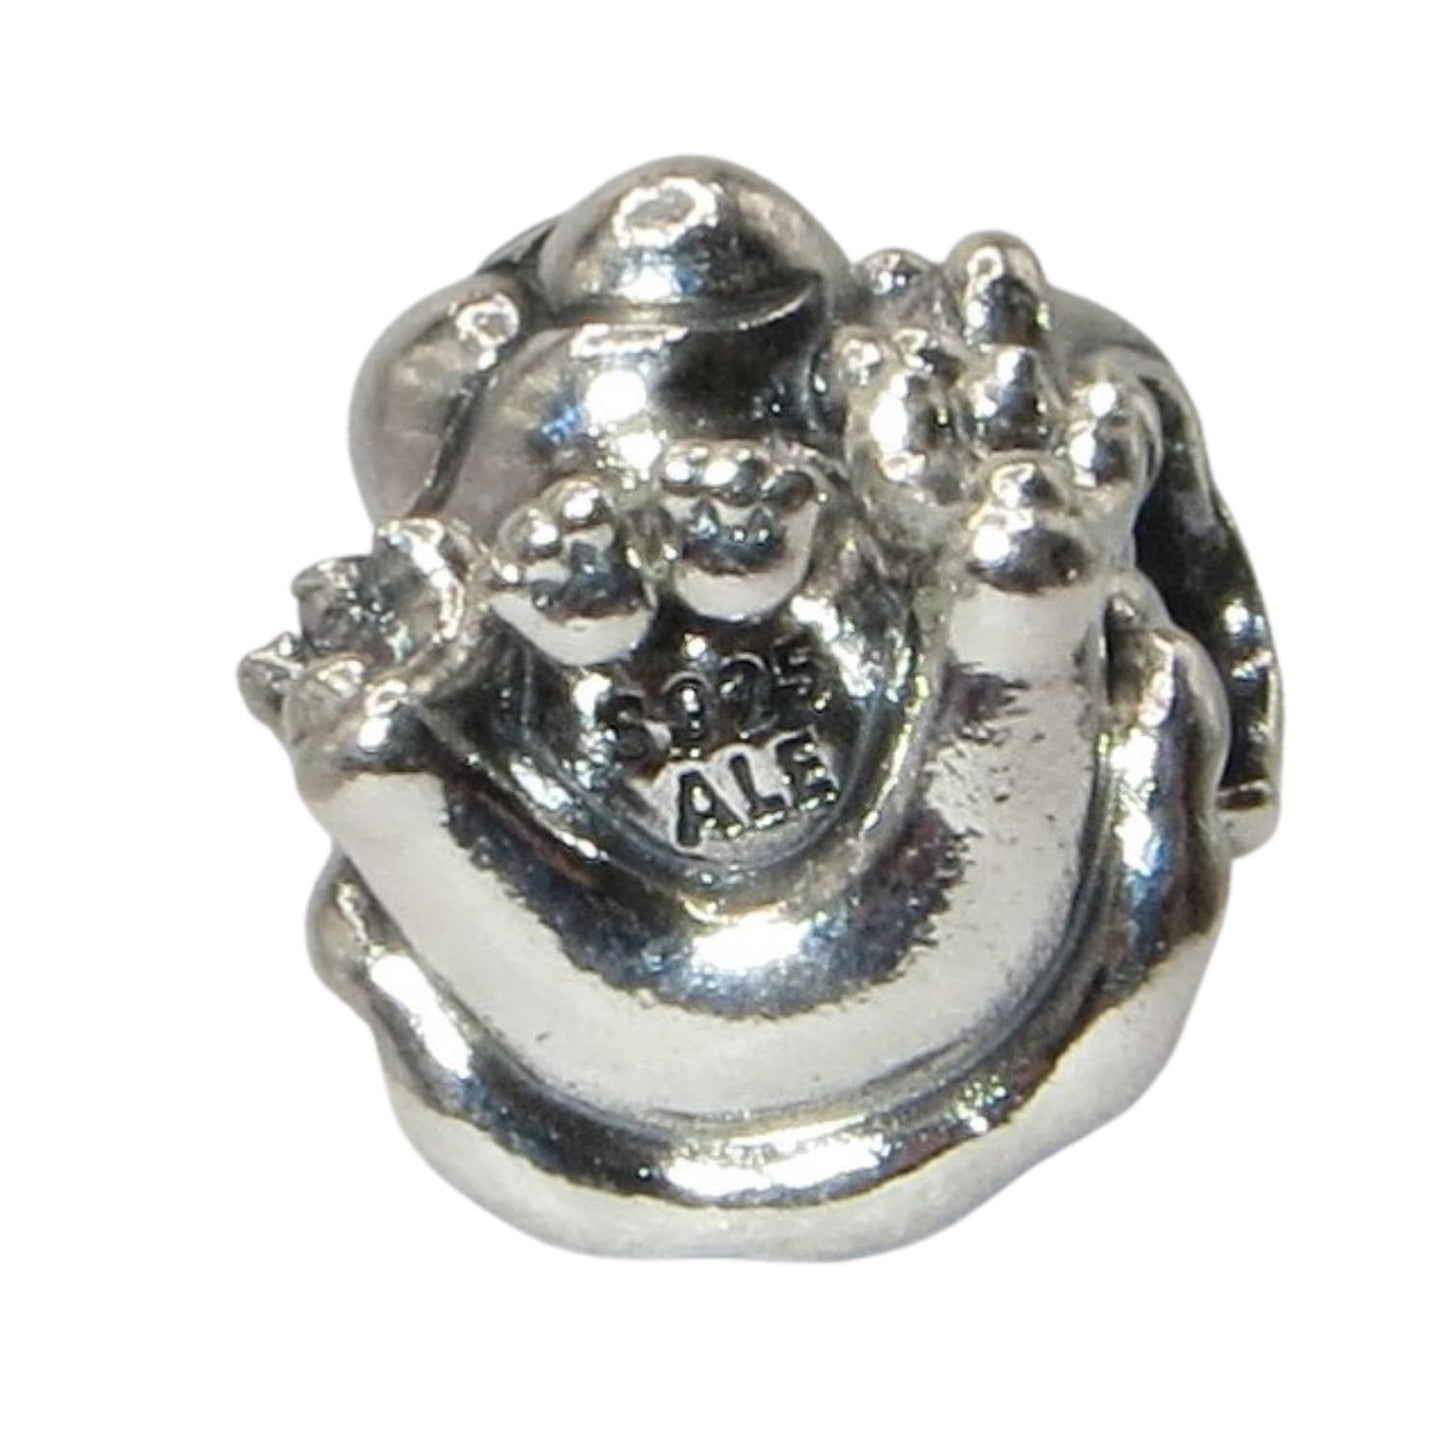 PANDORA 799032C01 Wavy Union Jack Lion - Handsome Sitting Sterling Silver Lion Wearing Cape Emblazoned with Red and Black Enamel Union Jack - Wavy Mane - Women's Charm - Charming Jilly